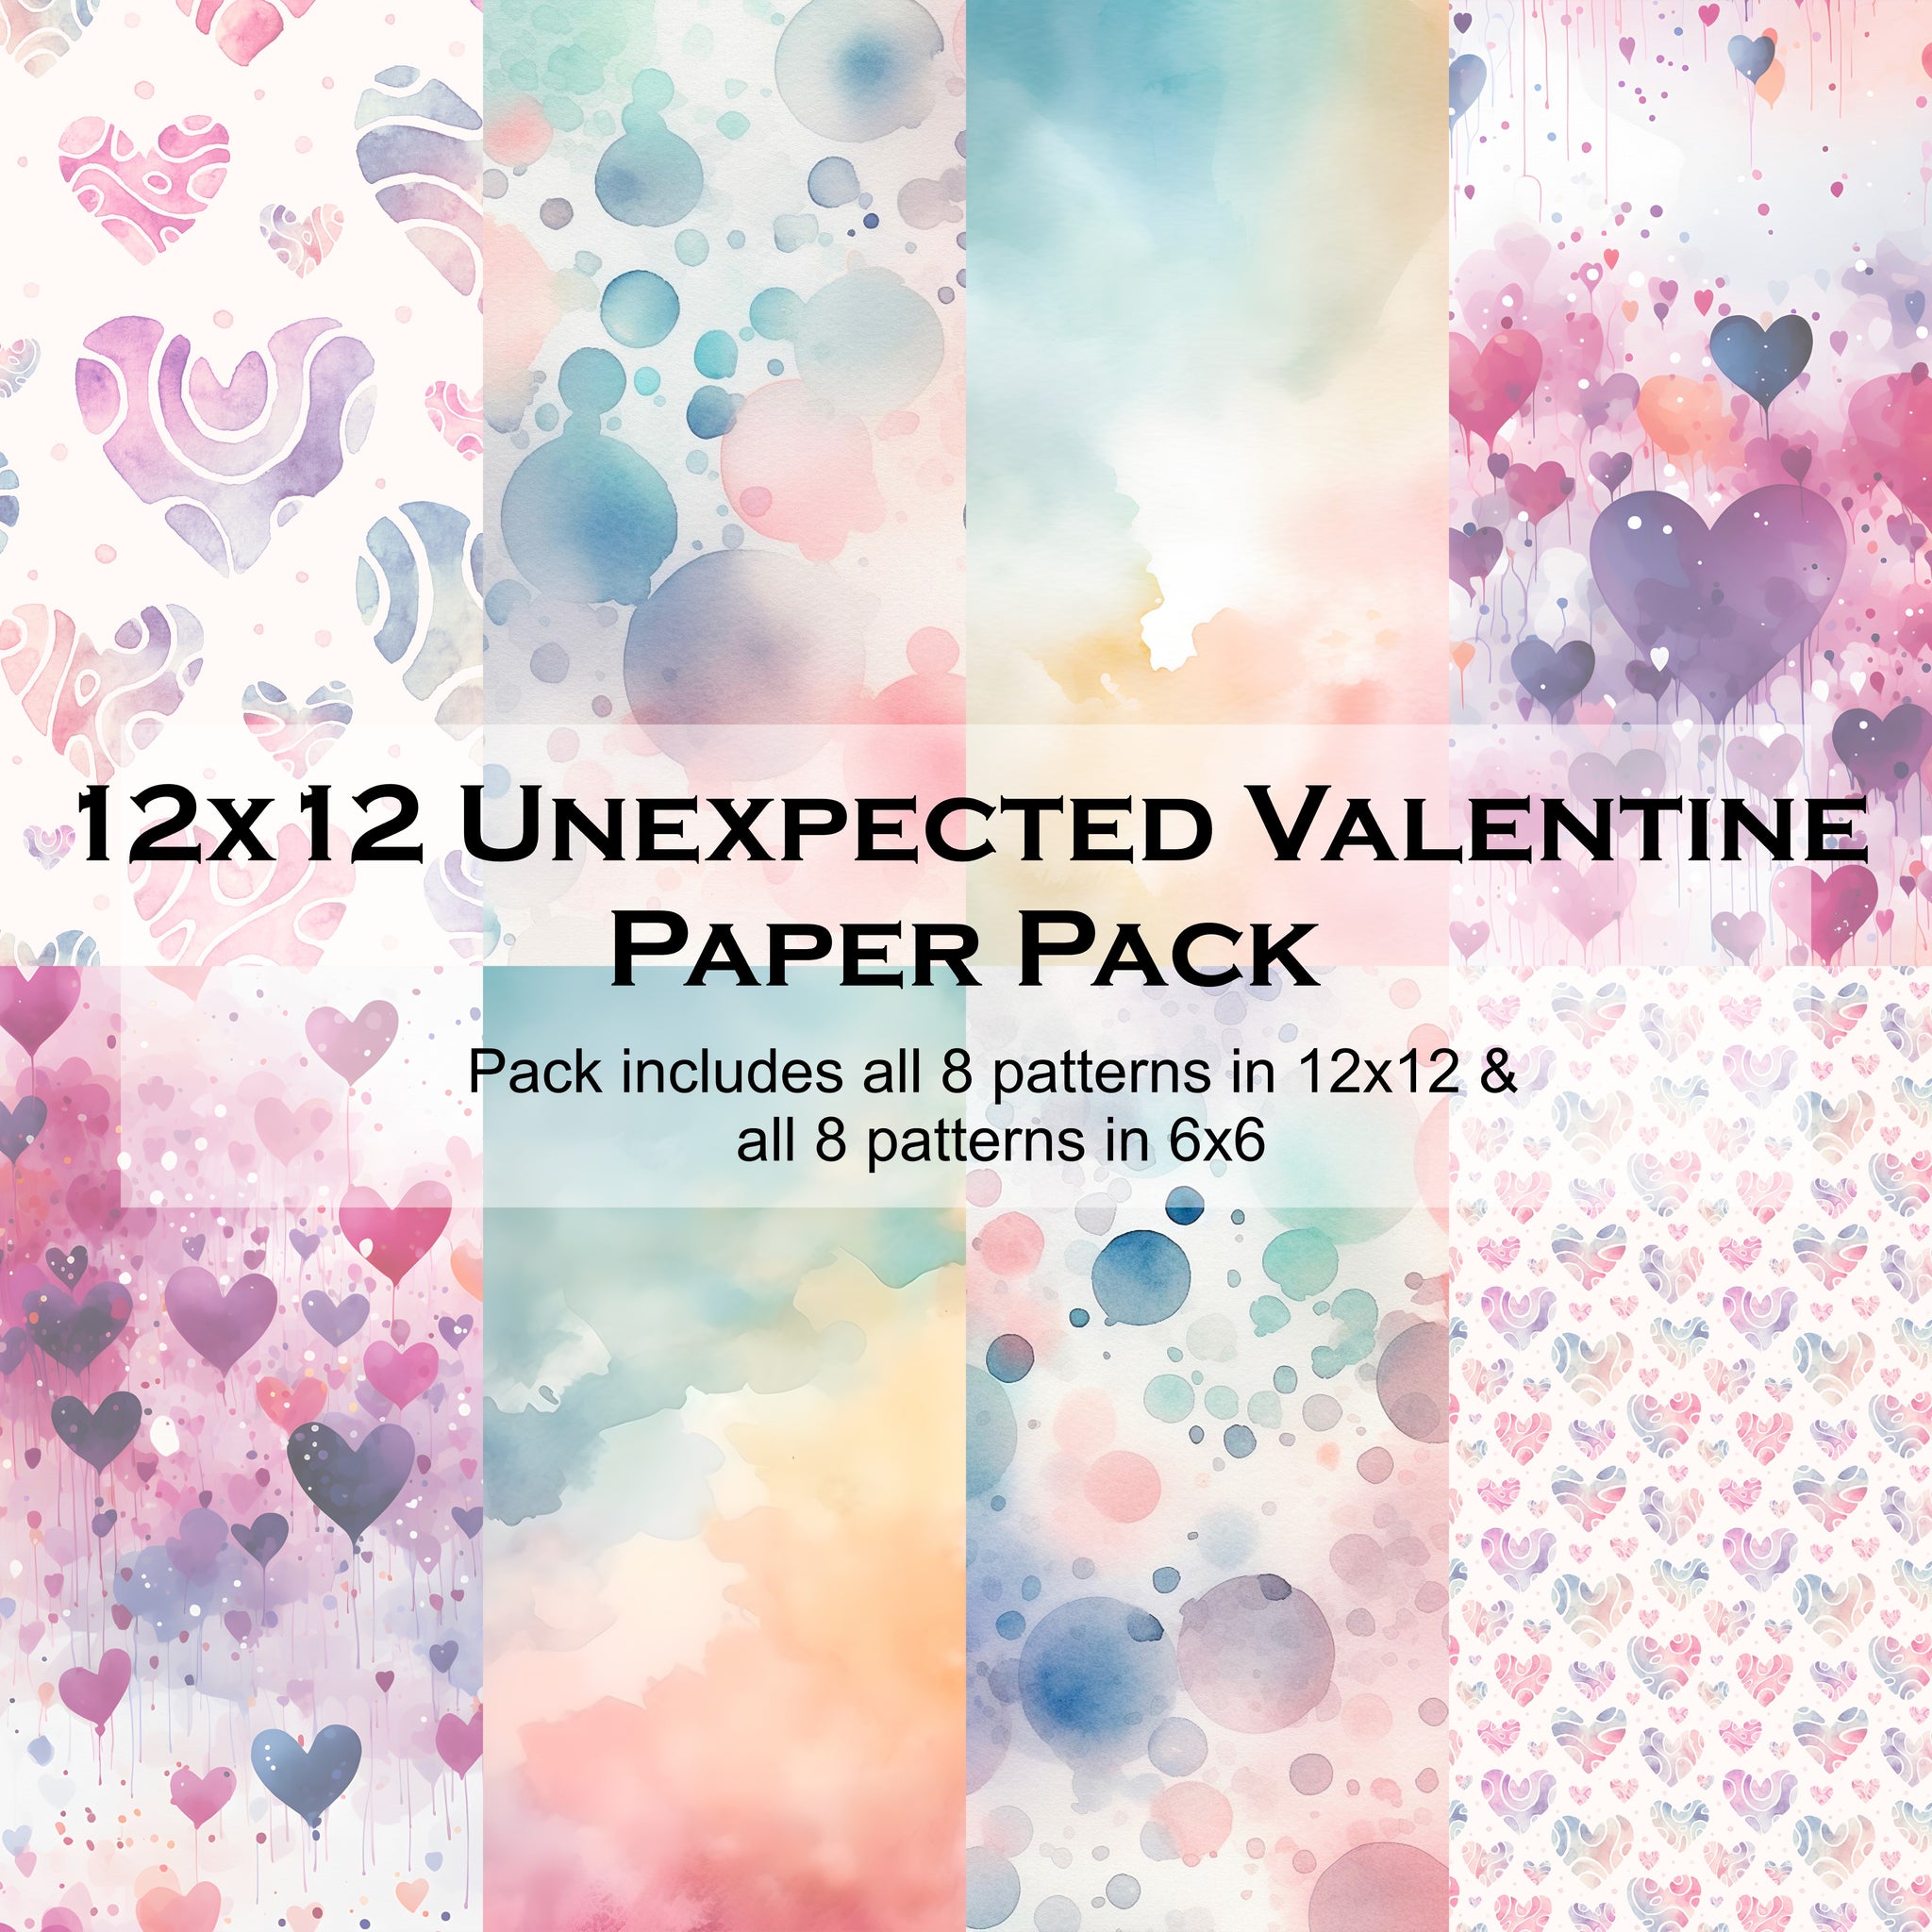 Unexpected Valentine 12x12 Paper Pack